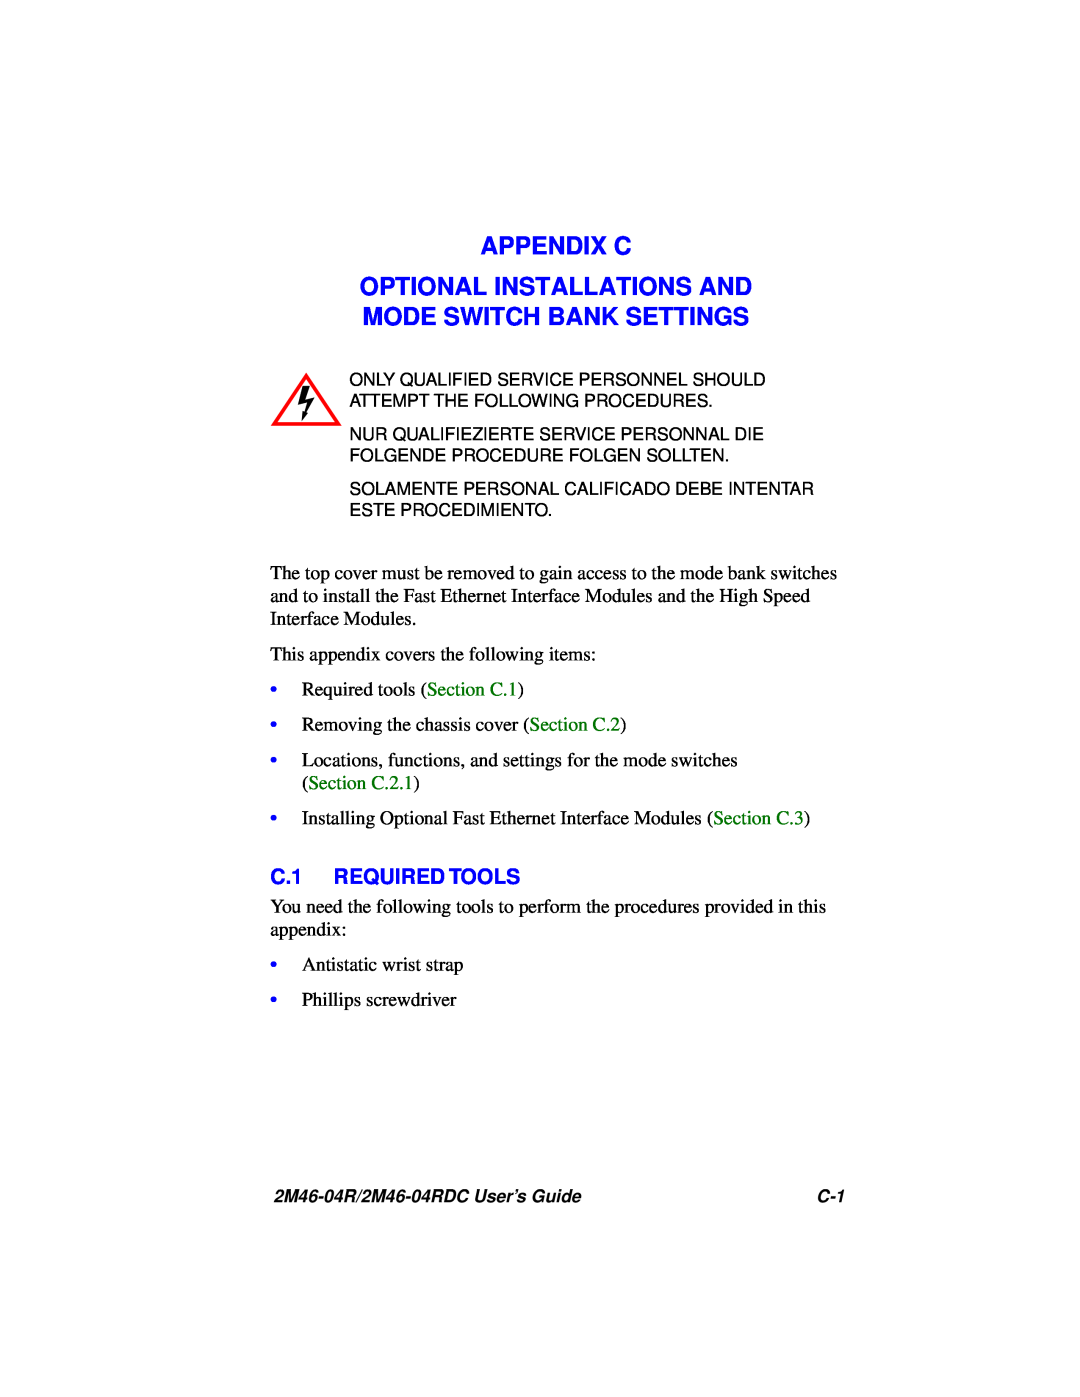 Cabletron Systems pmn manual Appendix C Optional Installations And Mode Switch Bank Settings, C.1 REQUIRED TOOLS 